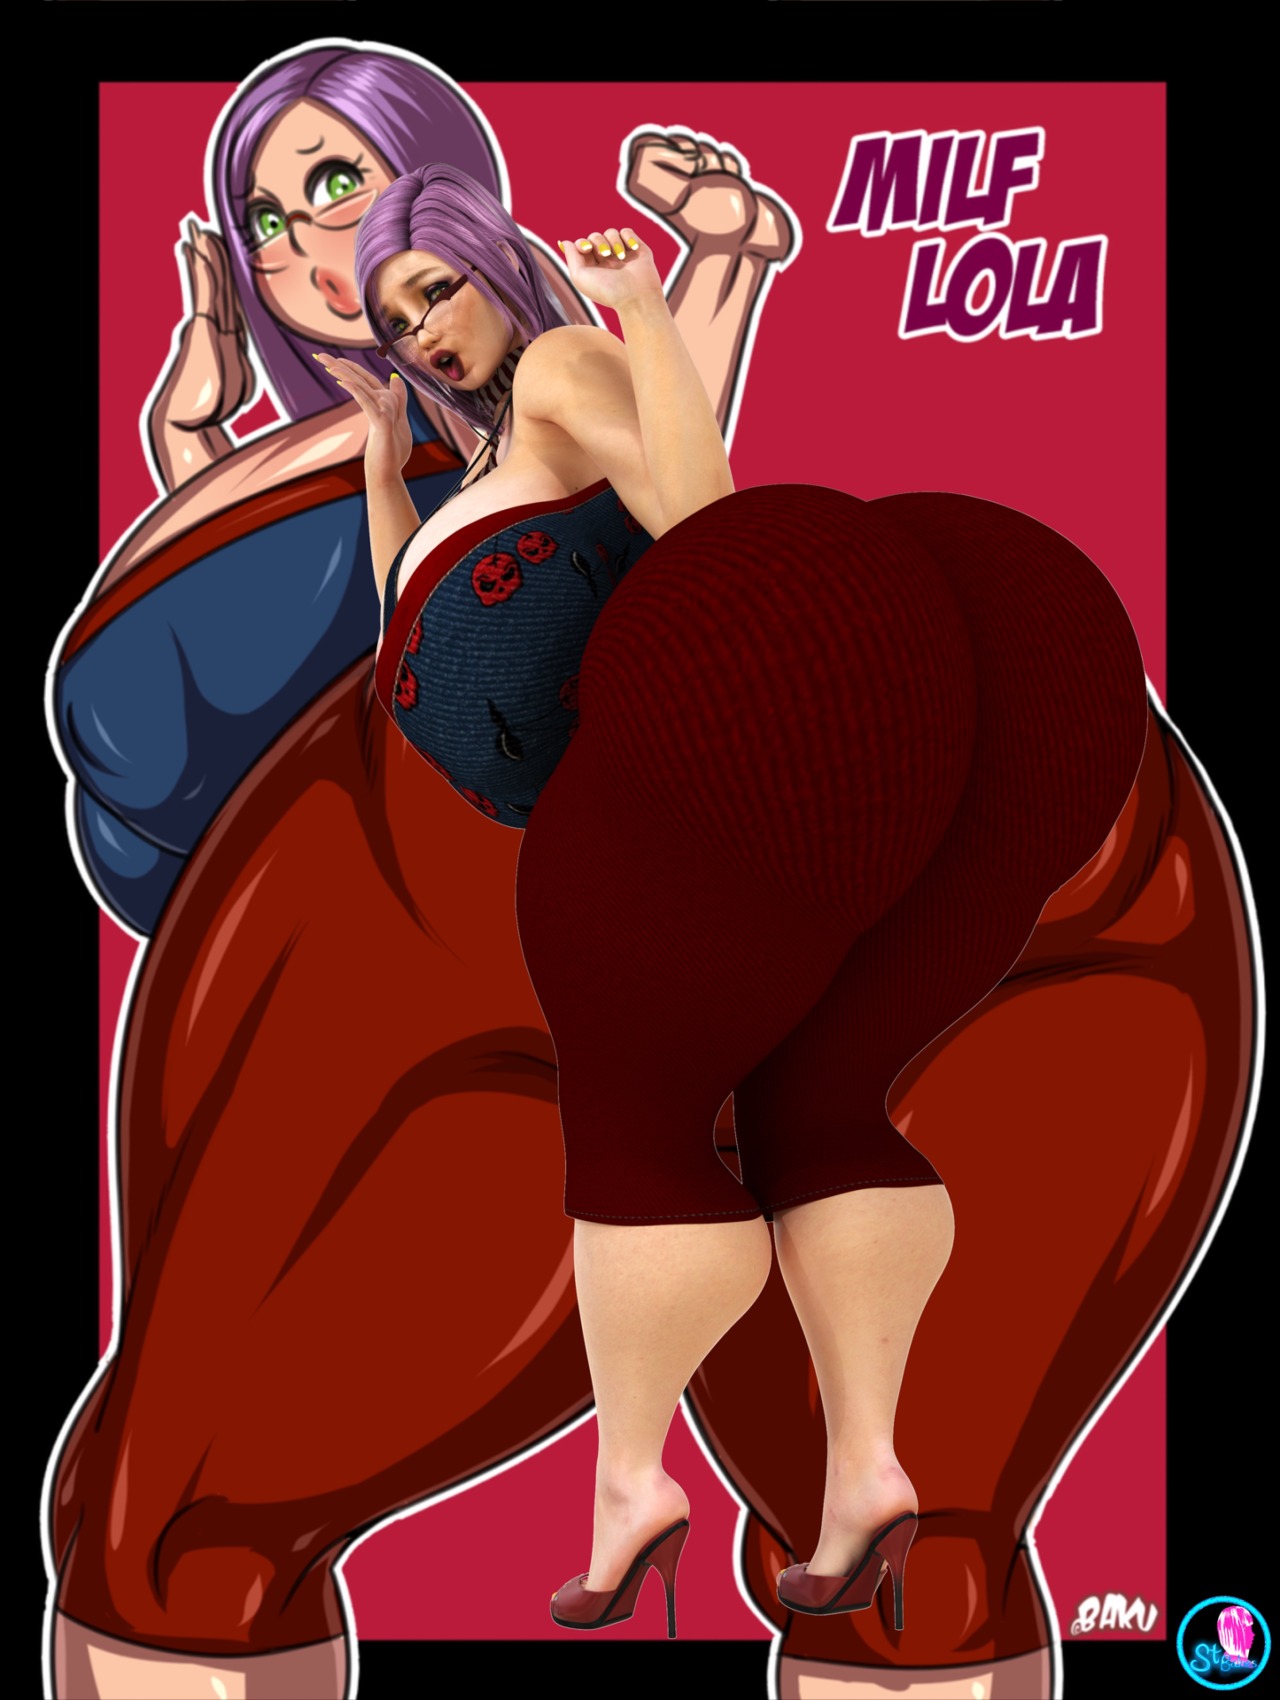 Hey guys, after getting a lovely gift of Older Lola from @bakudemon I just had to